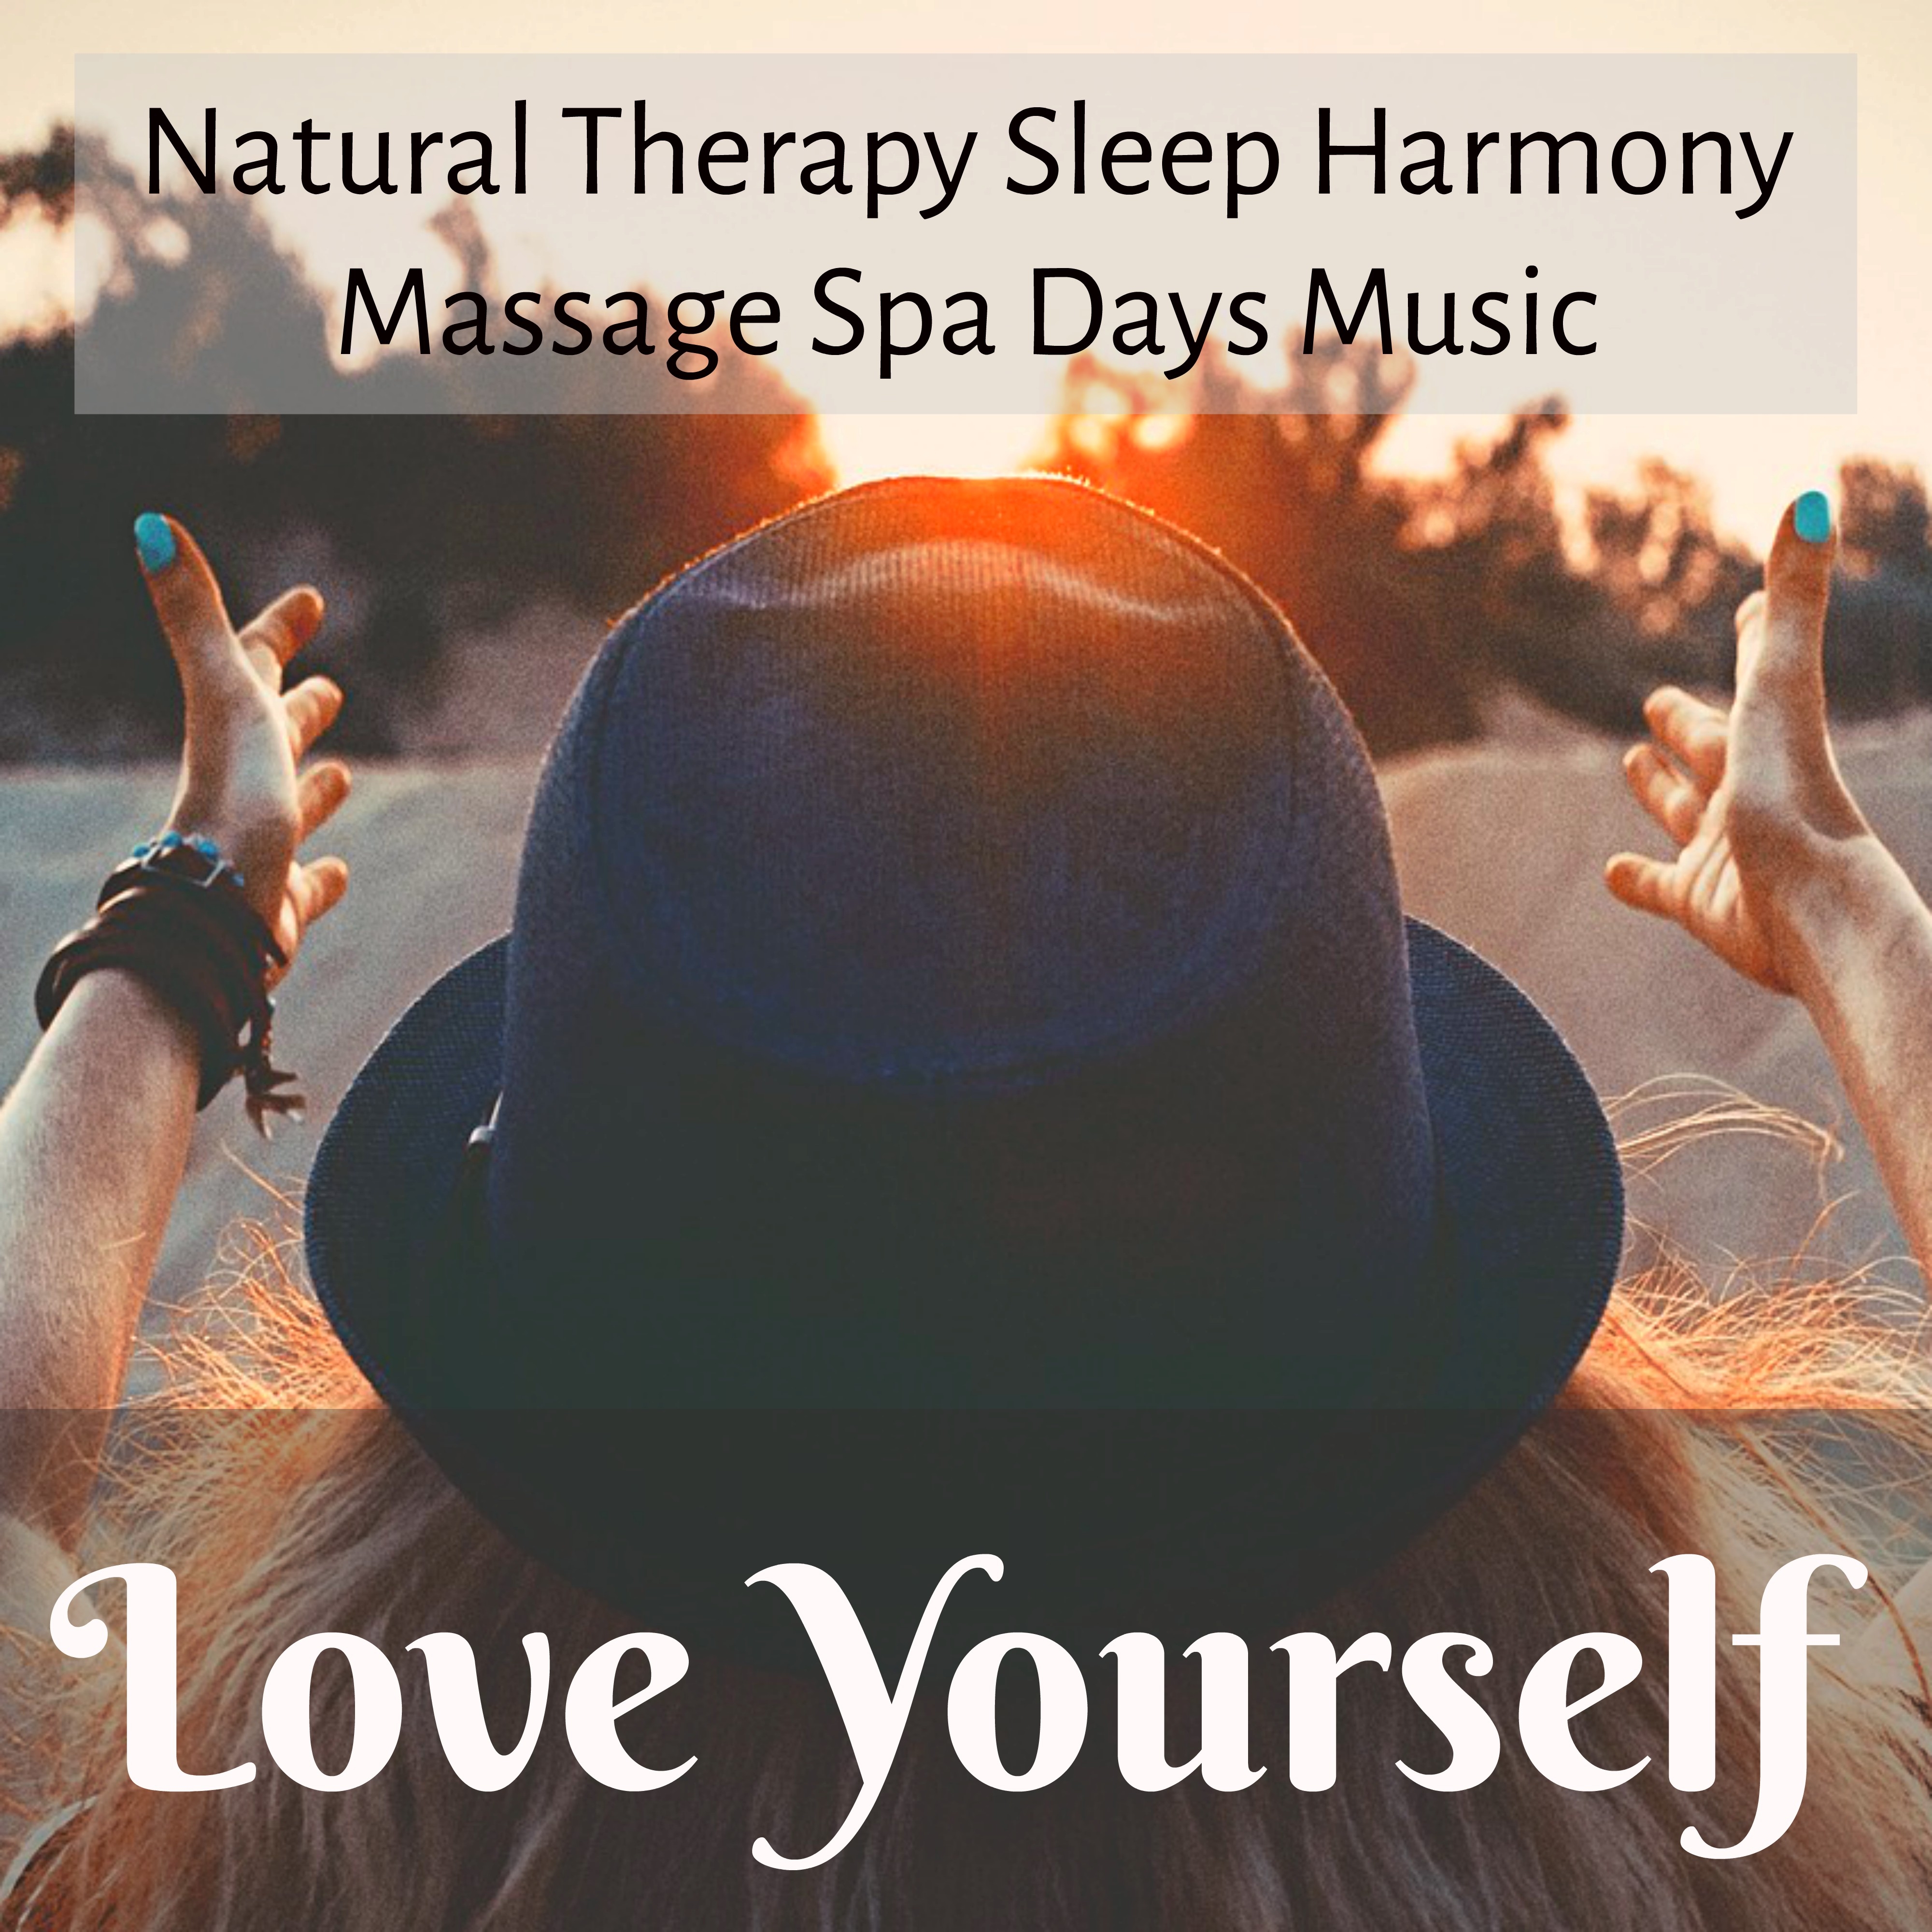 Love Yourself - Natural Therapy Sleep Harmony Massage Spa Days Music with Instrumental Healing Sounds